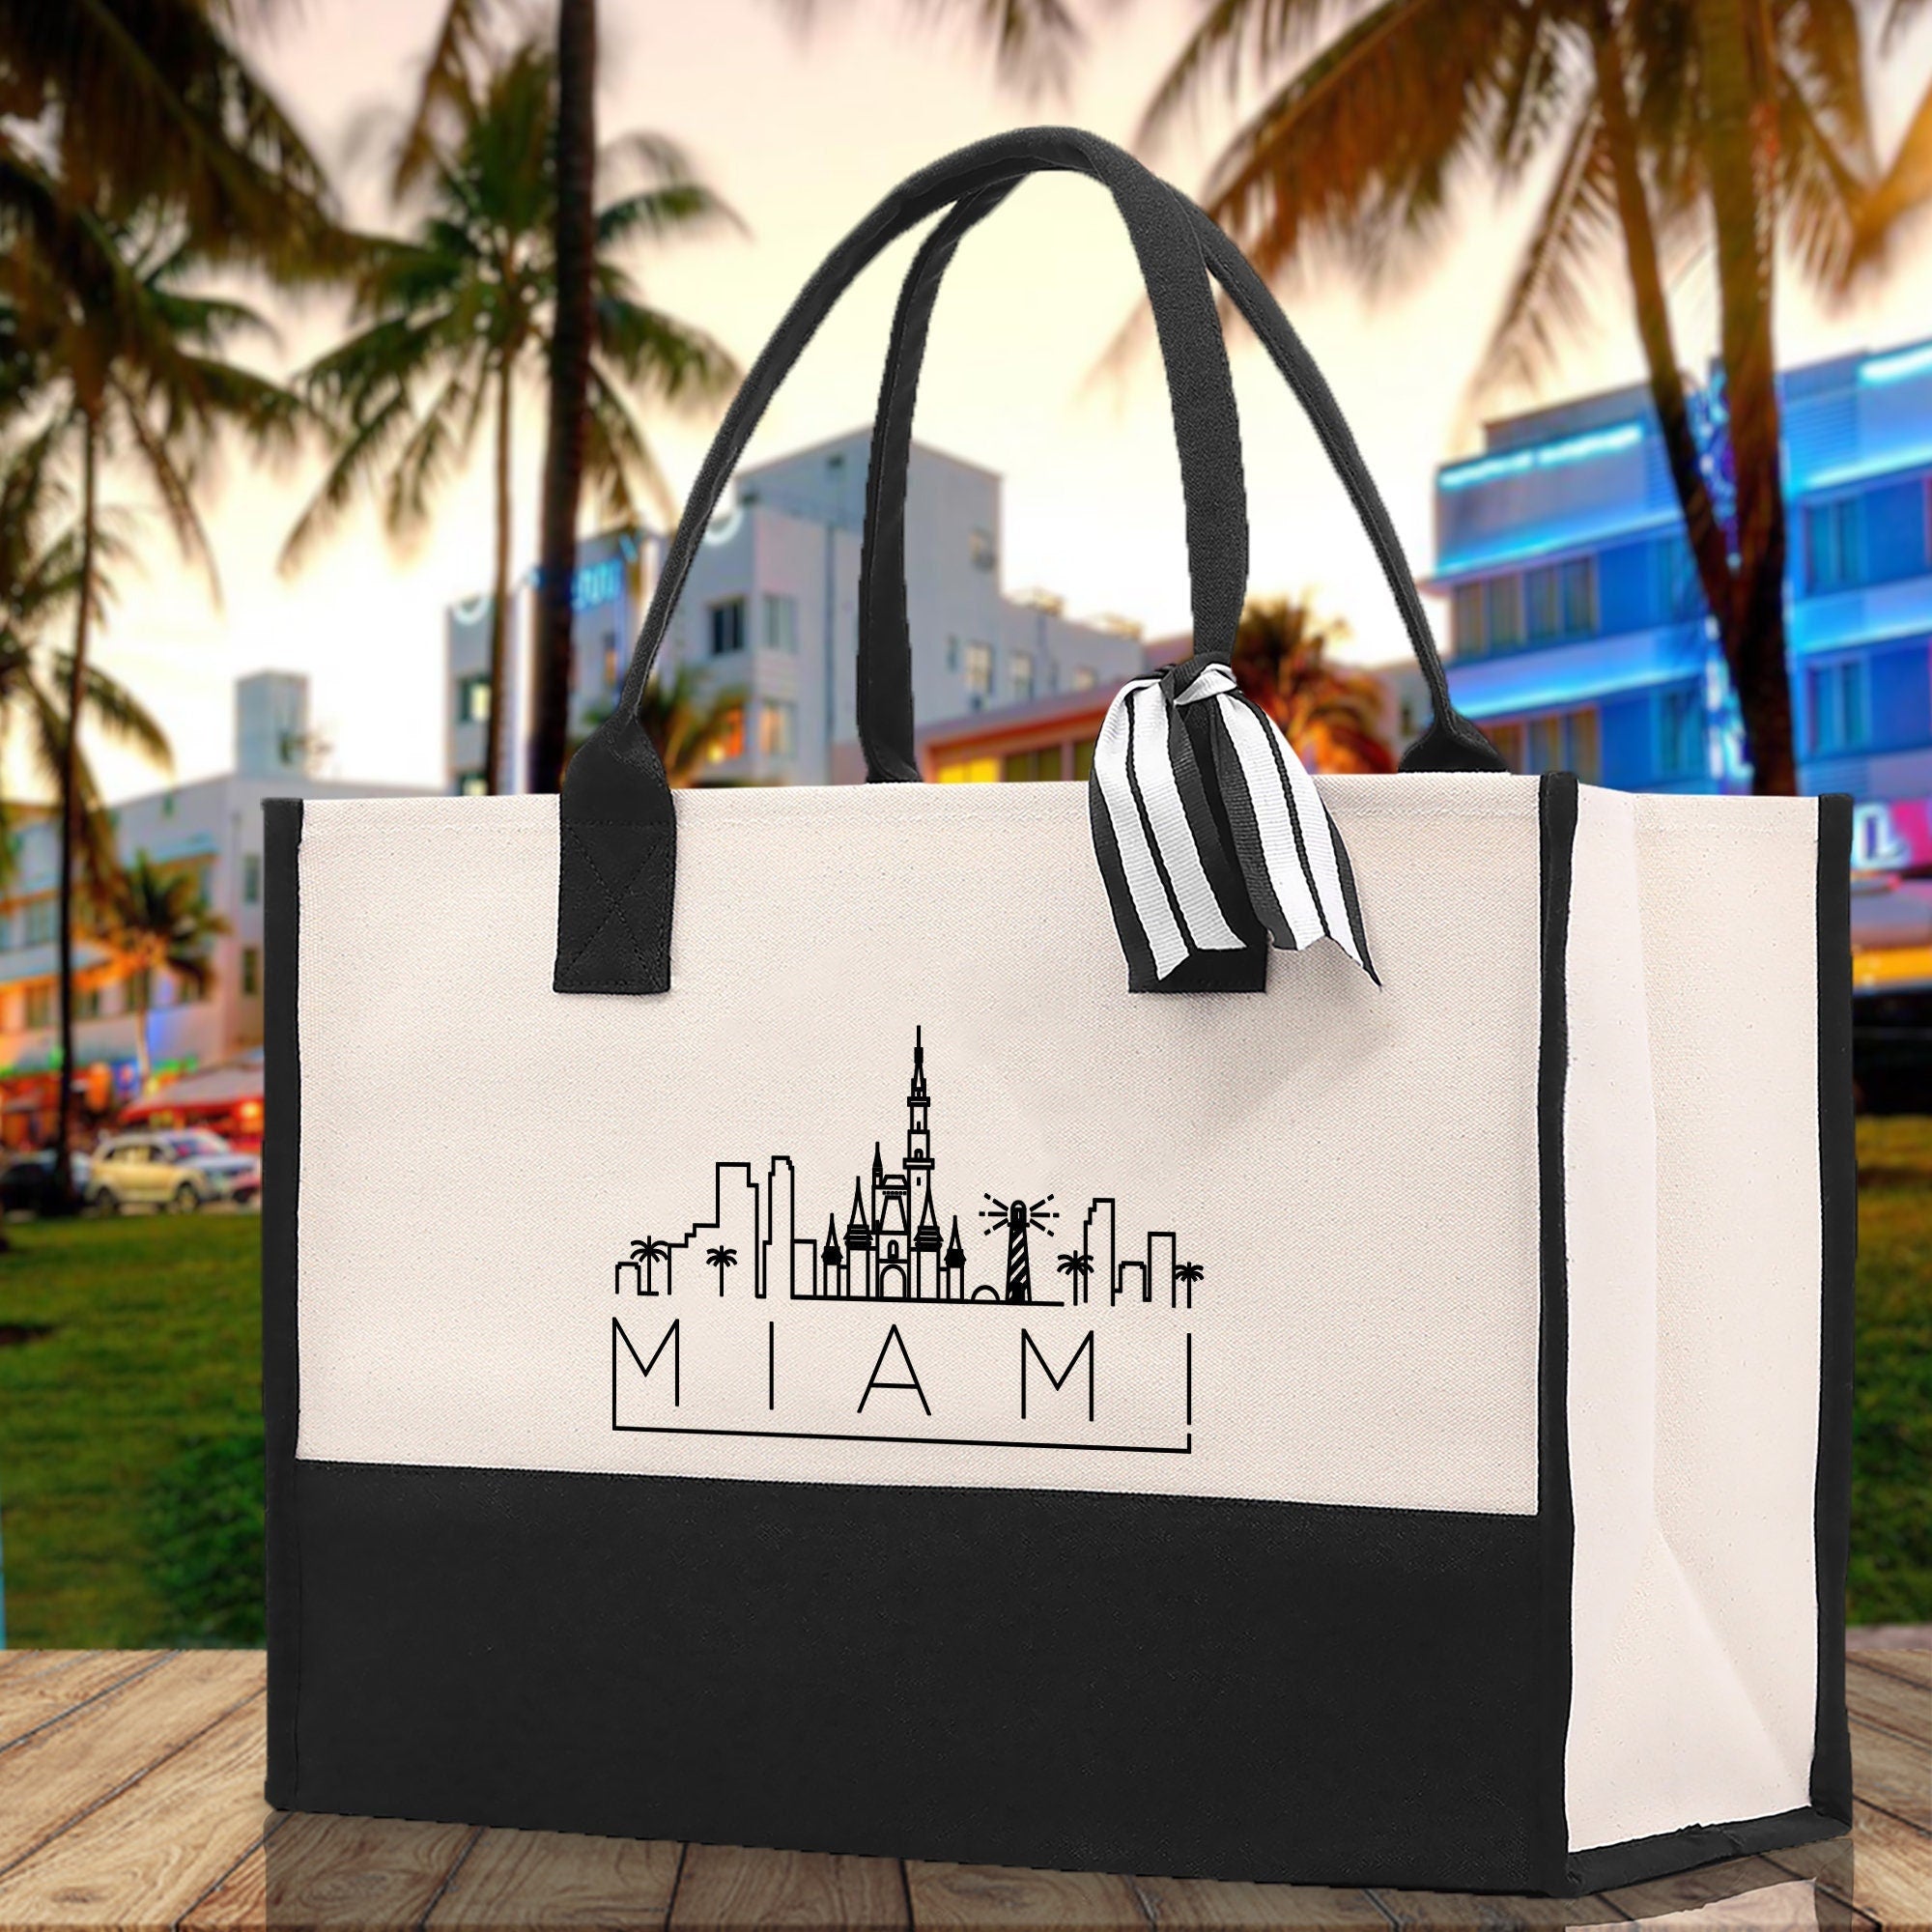 Miami Canvas Tote Bag Travel Vacation Tote Employee and Client Gift Wedding Favor Birthday Welcome Tote Bag Bridesmaid Gift